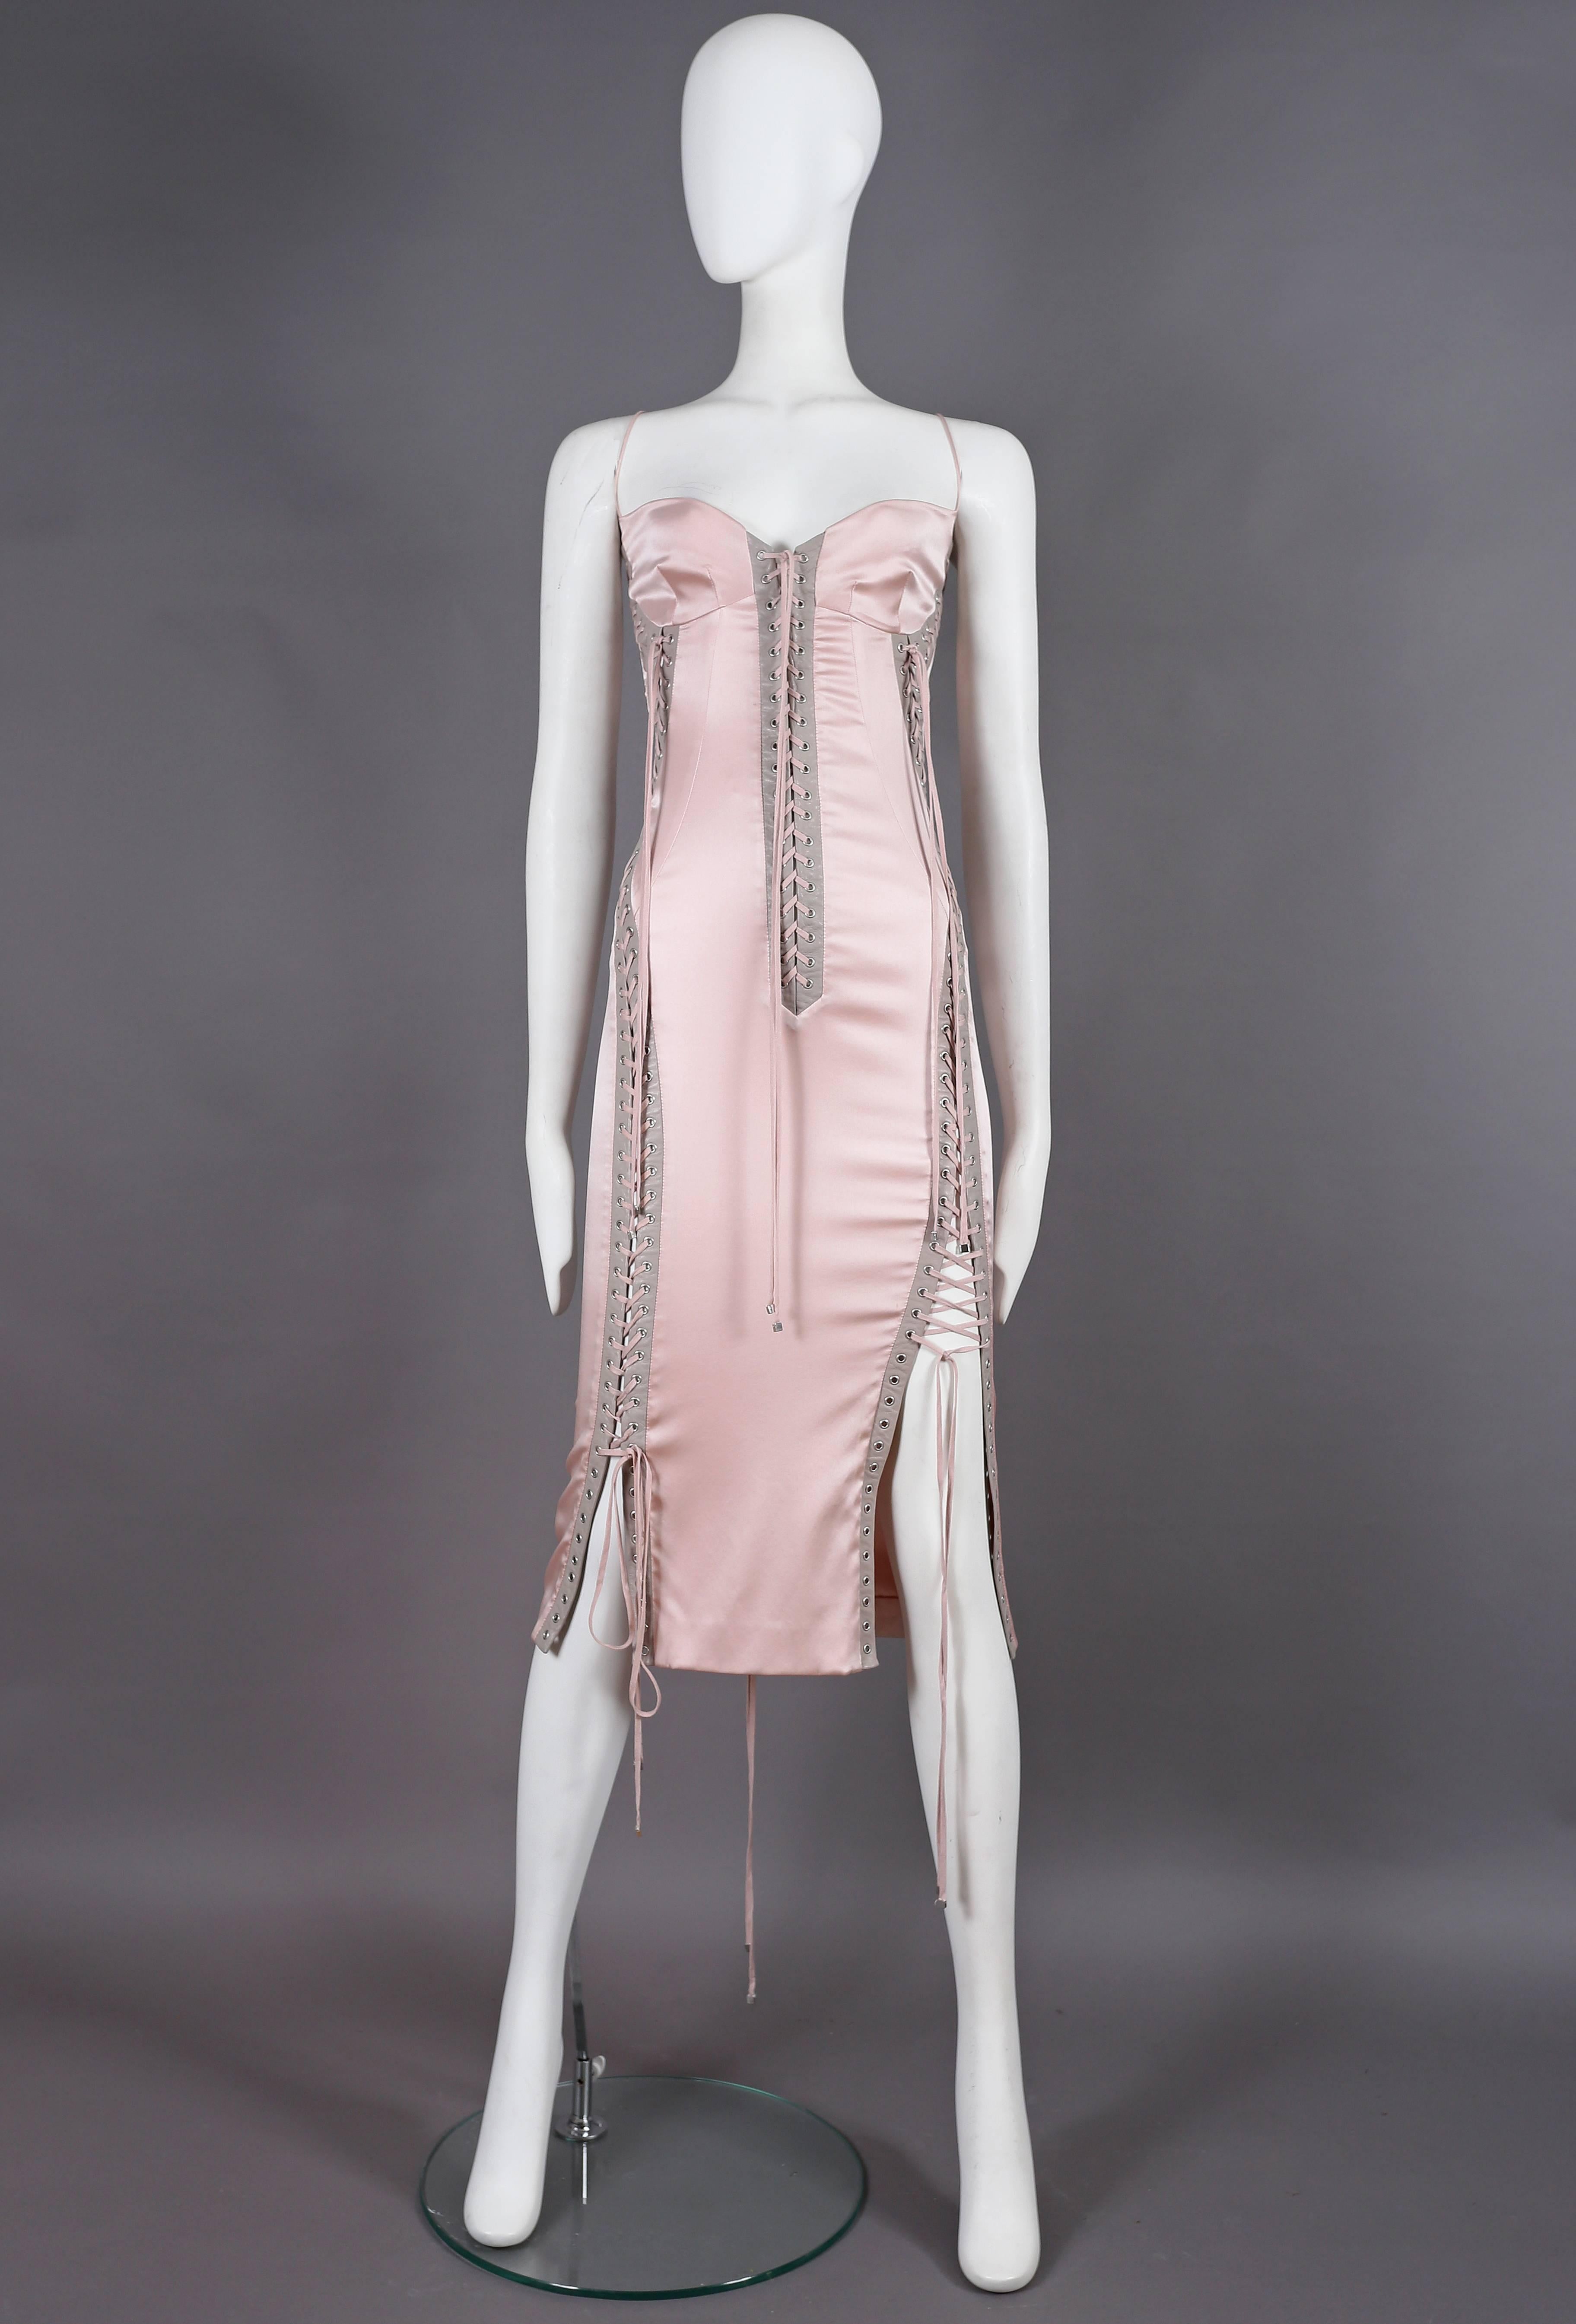 A fine and rare Dolce & Gabbana corset dress in baby pink silk with lambskin leather trim from the spring-summer 2003 collection. 

The dress features multiple lace-up fastenings throughout which can be adjusted in various ways to show more skin